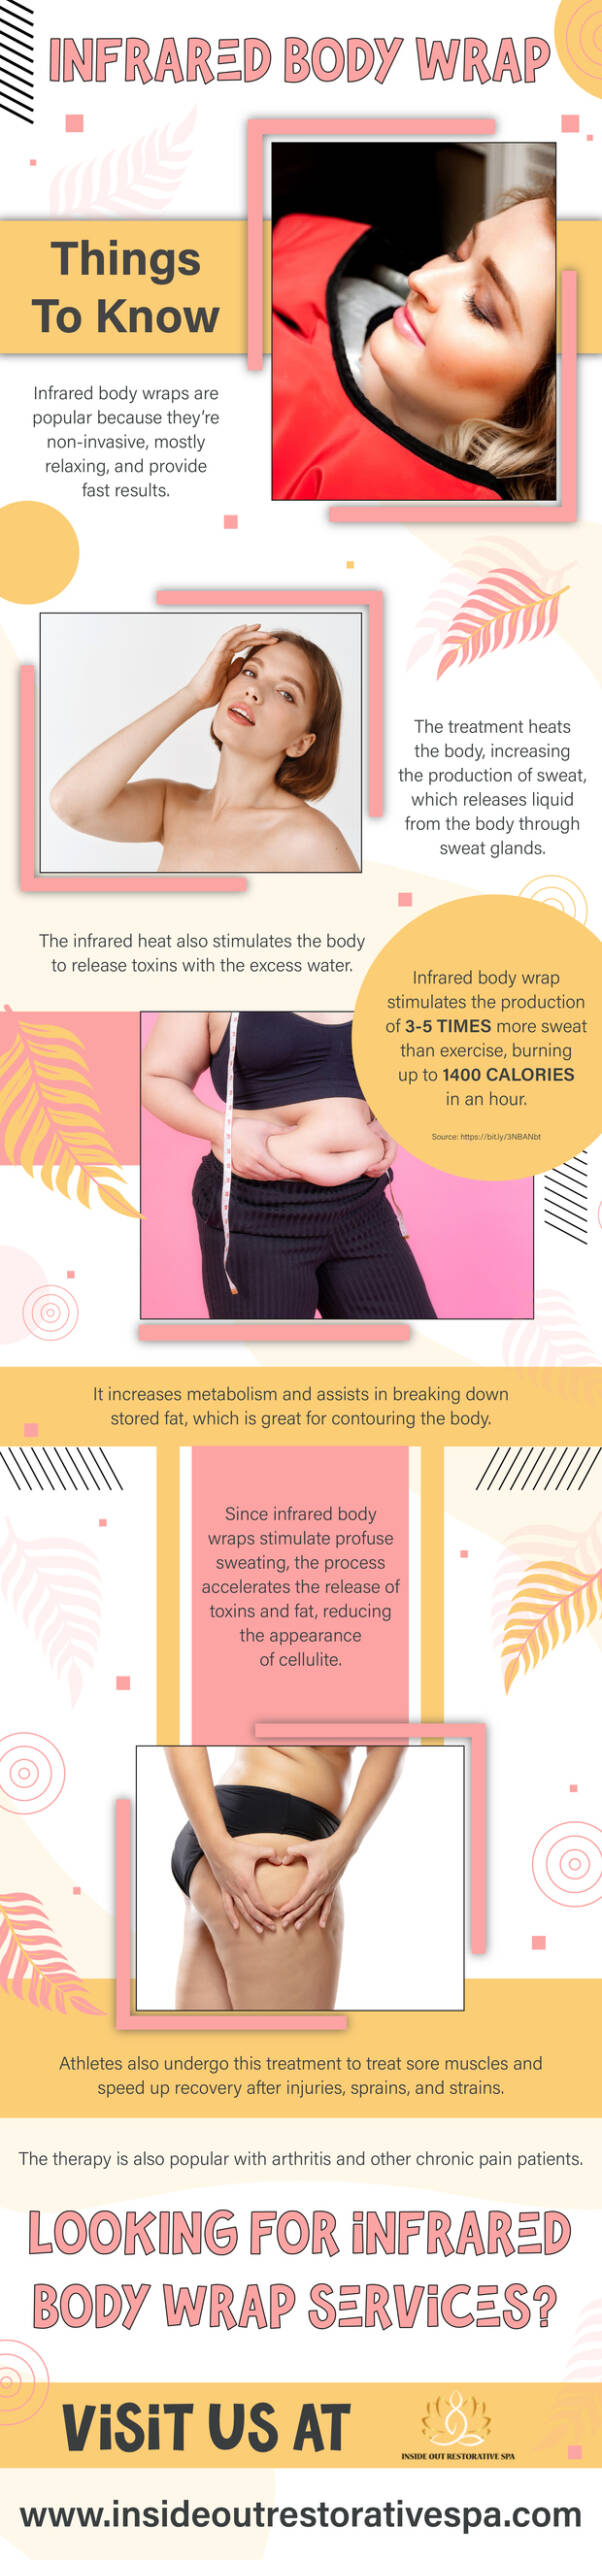 Infrared Body Wrap - Infograph